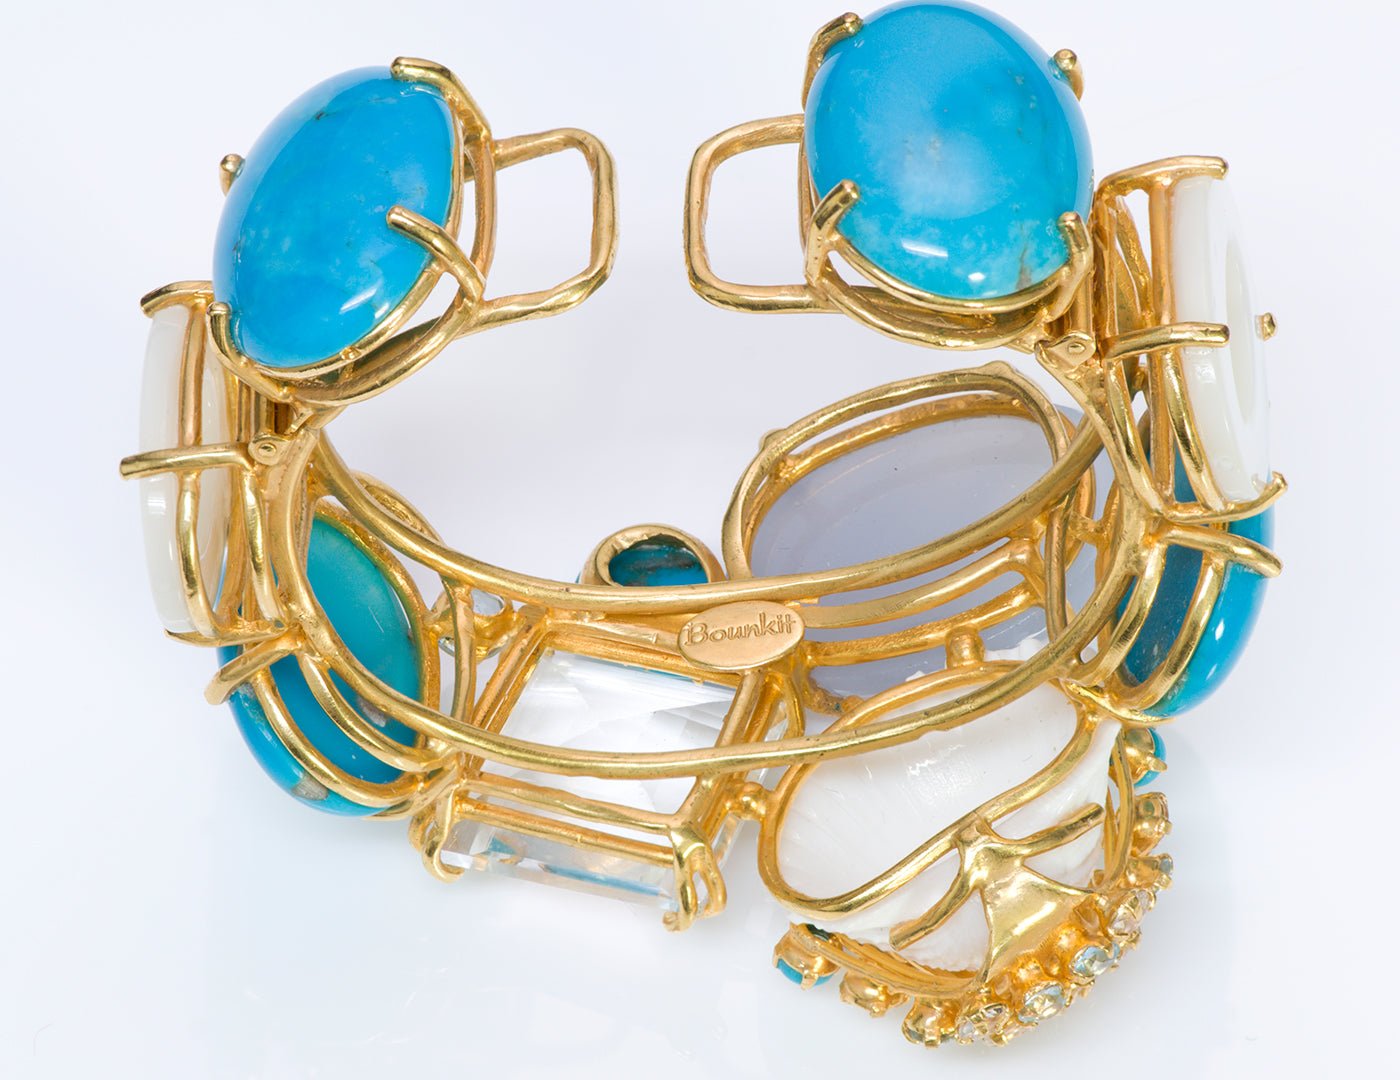 Bounkit Turquoise Mother of Pearl Shell Cuff Bracelet